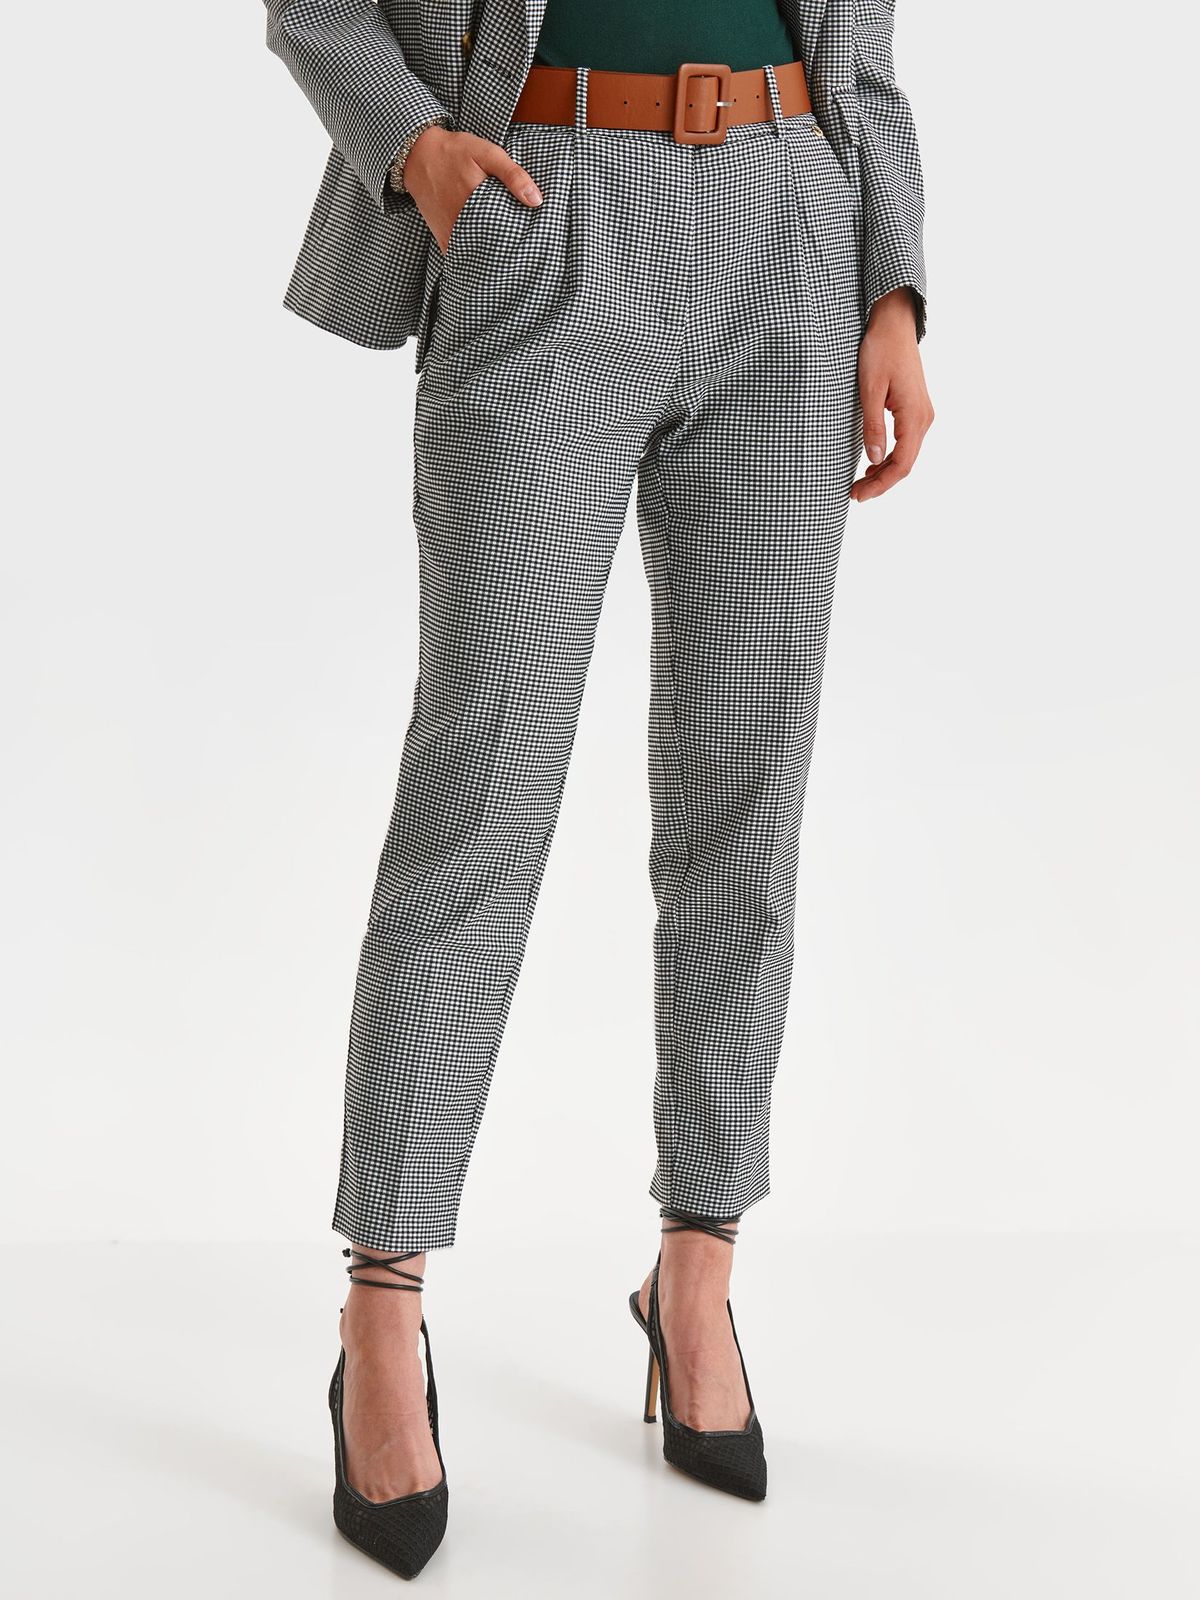 Grey trousers with chequers elastic cloth with pockets